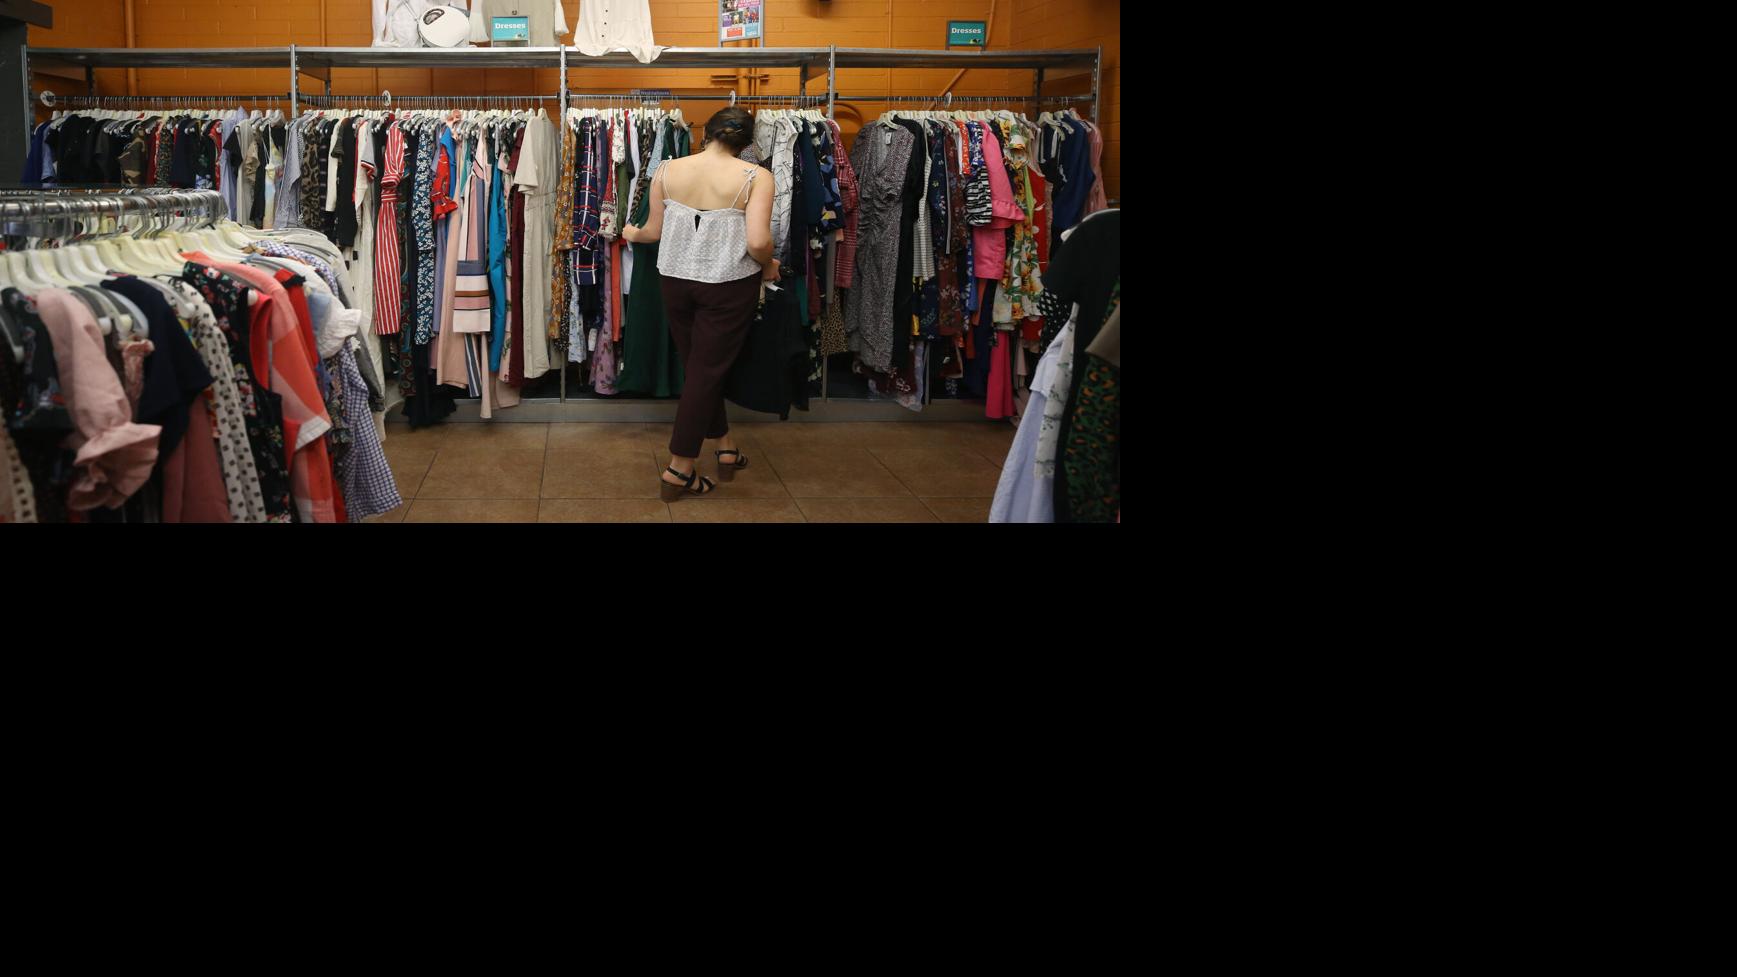 5 Reasons to Shop at a Thrift Store vs. a Consignment Shop